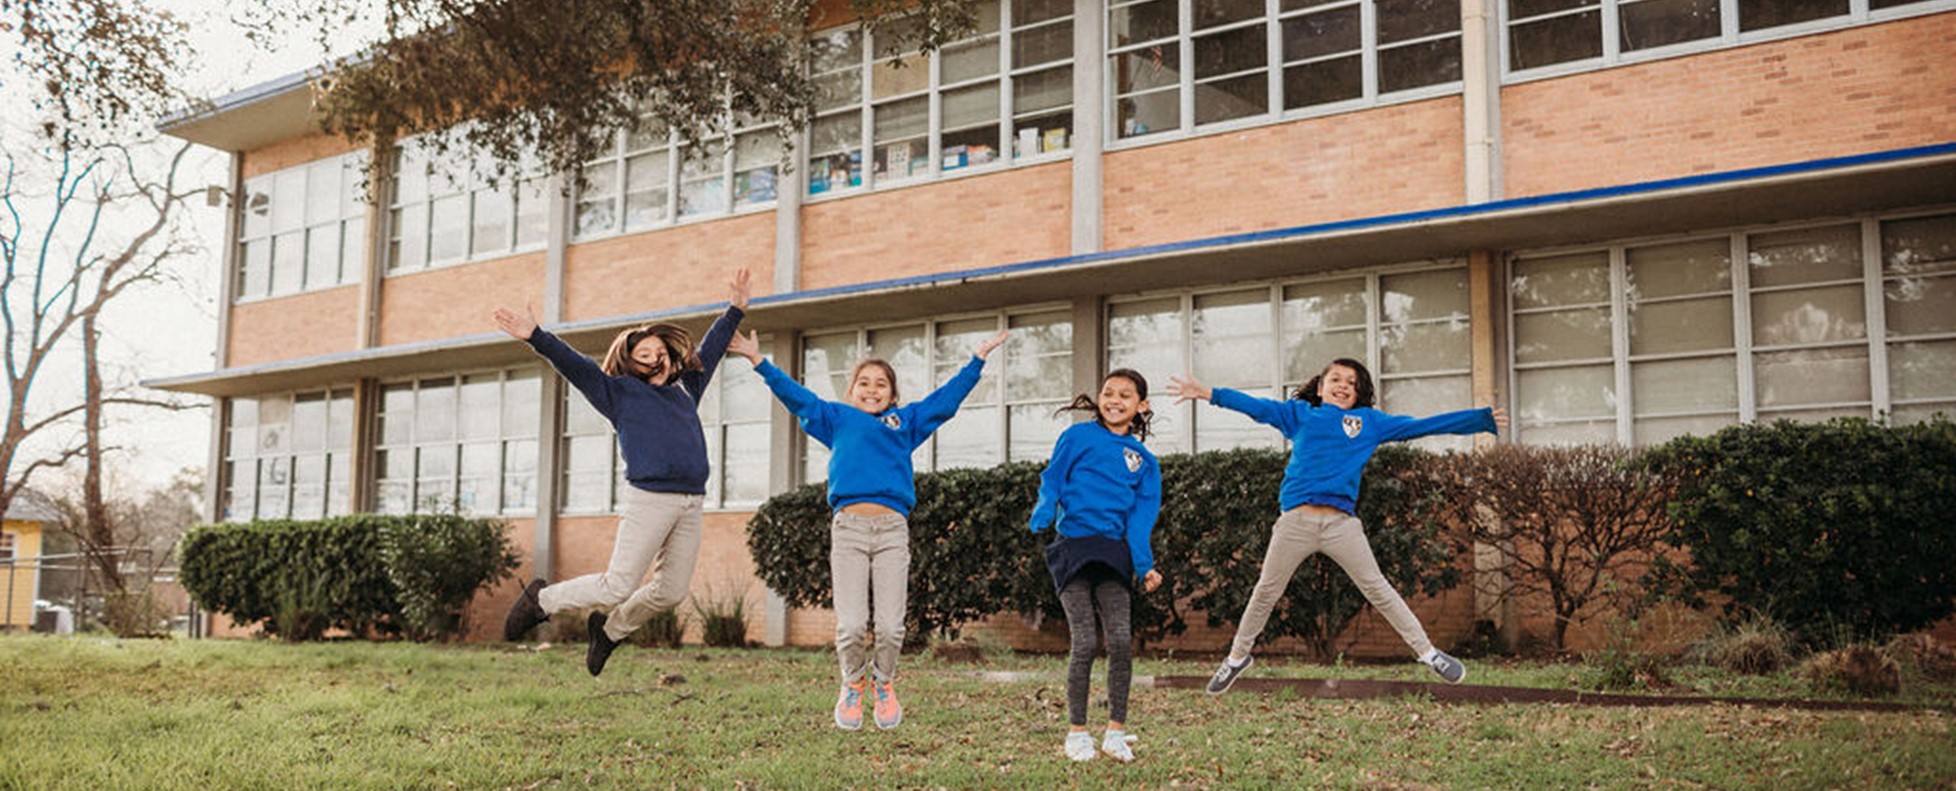 Students-jumping-outside-school